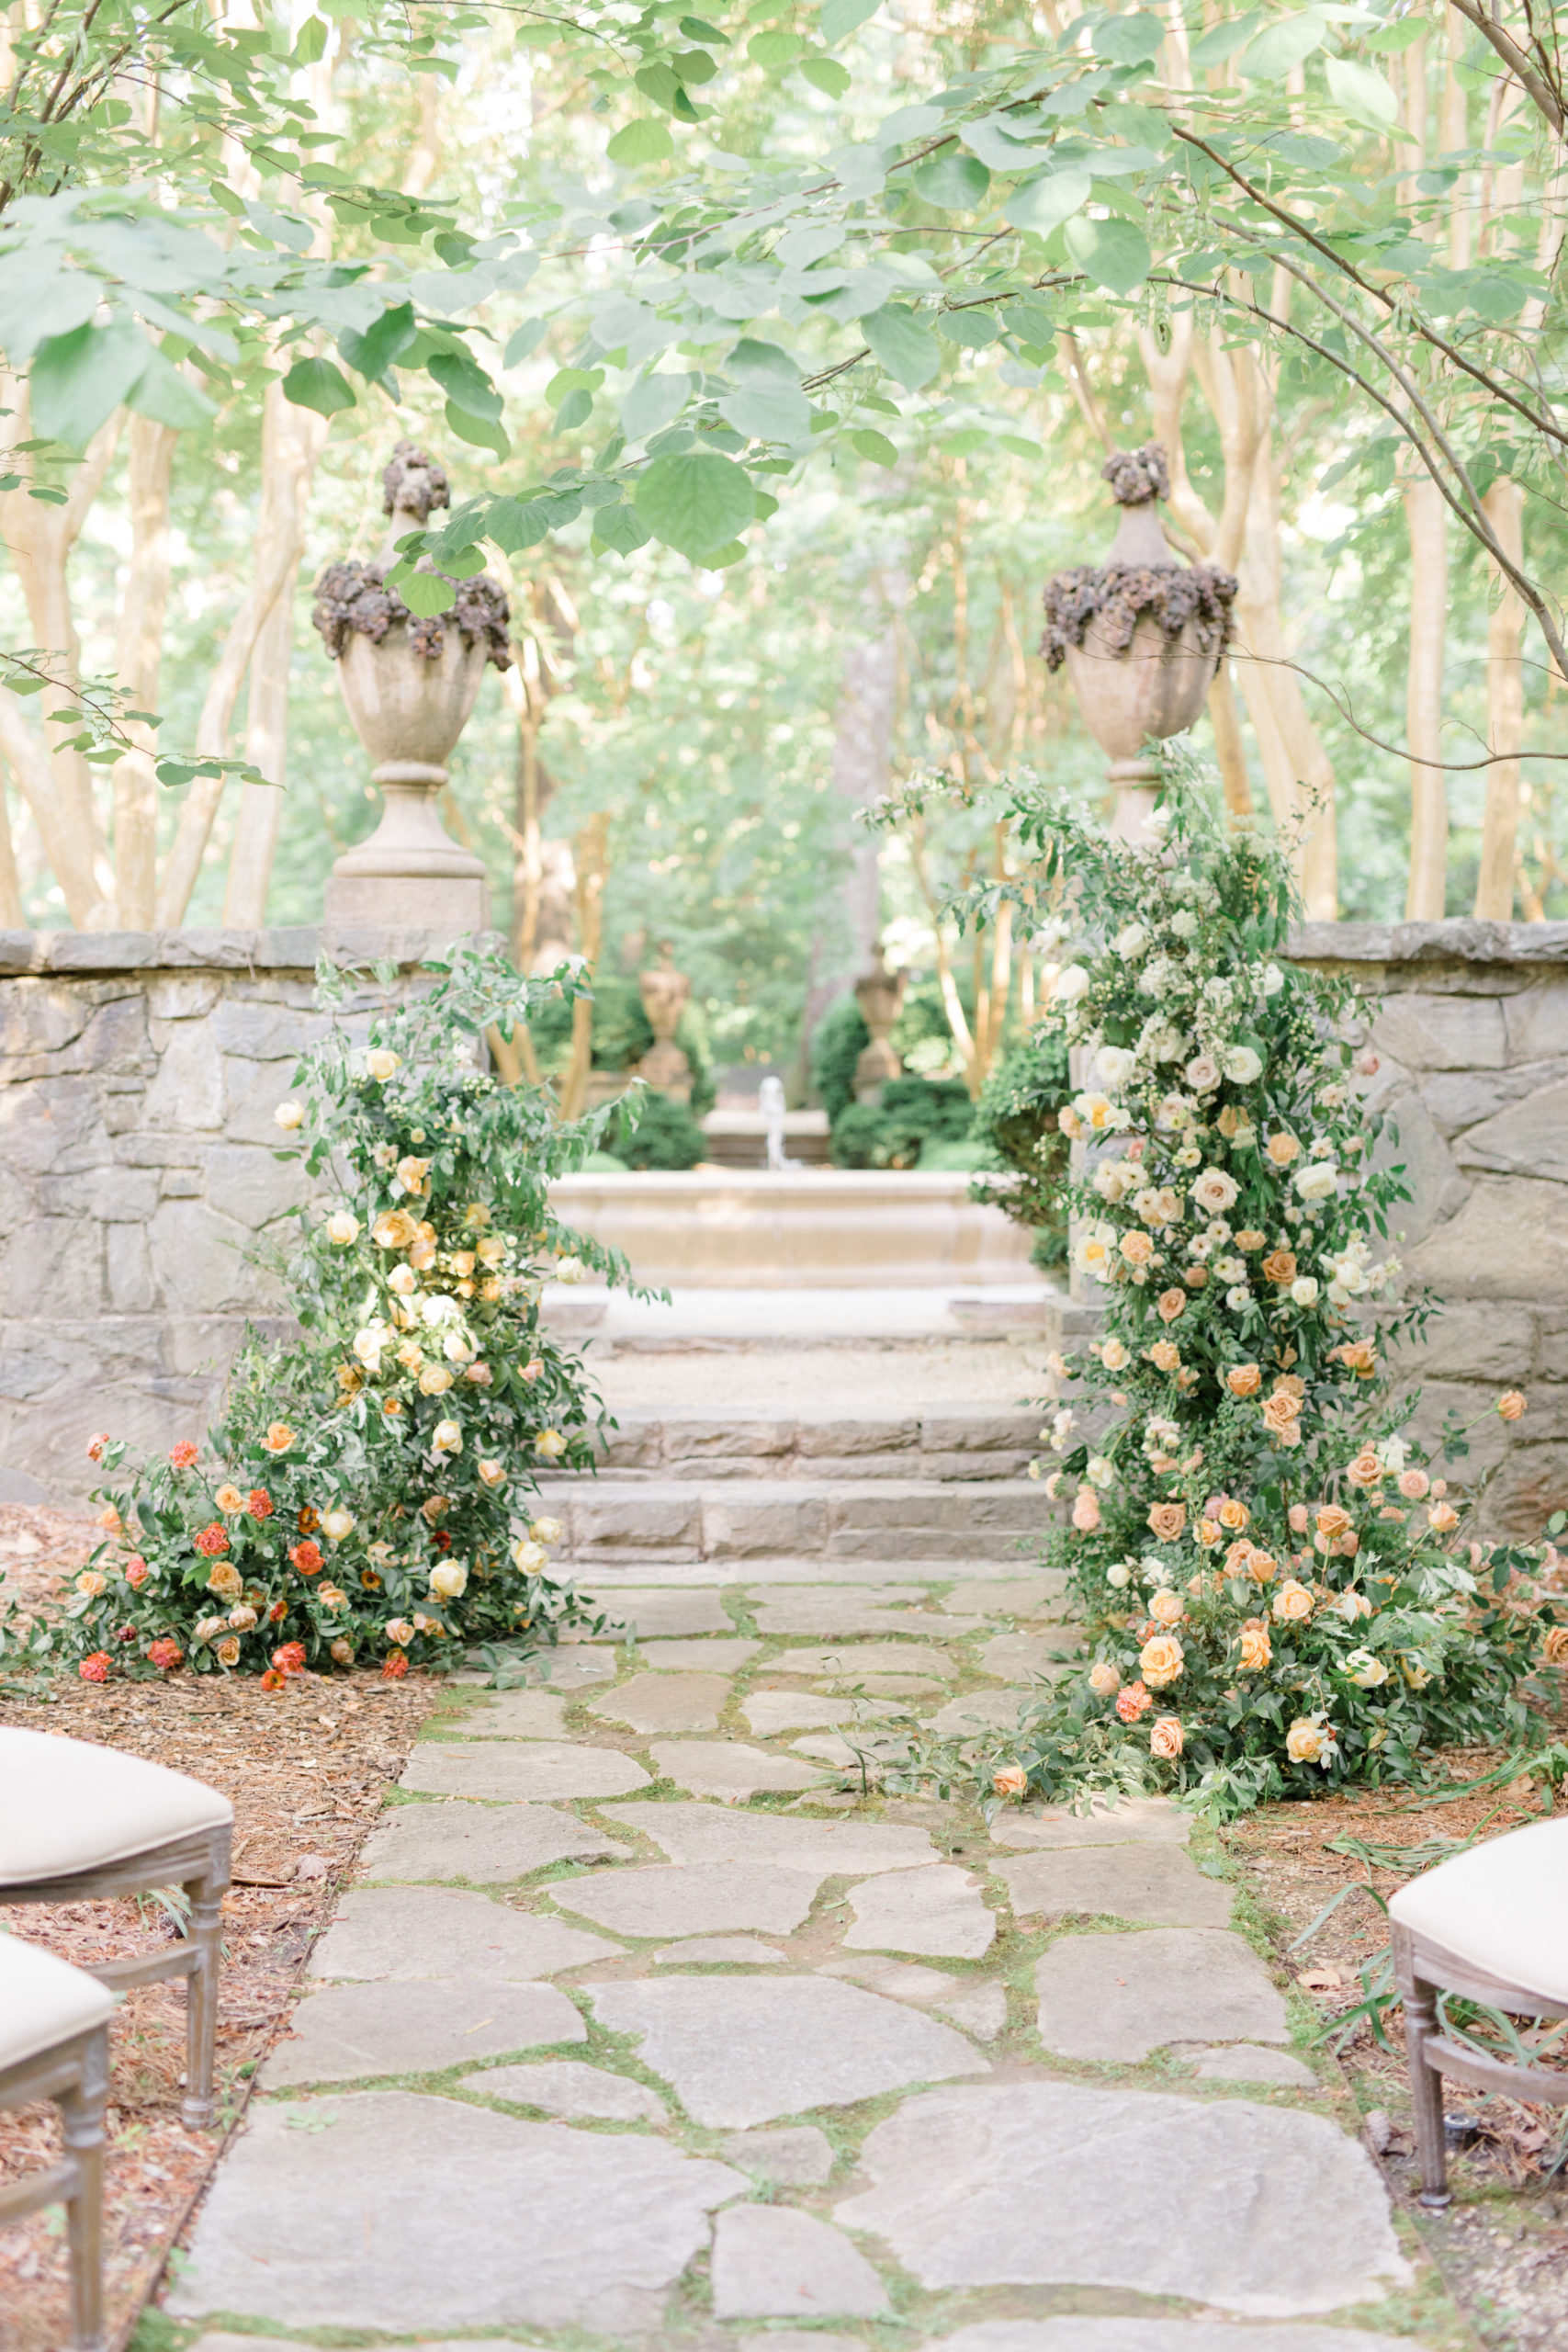 Ceremony floral installation with greenery, yellows and oranges